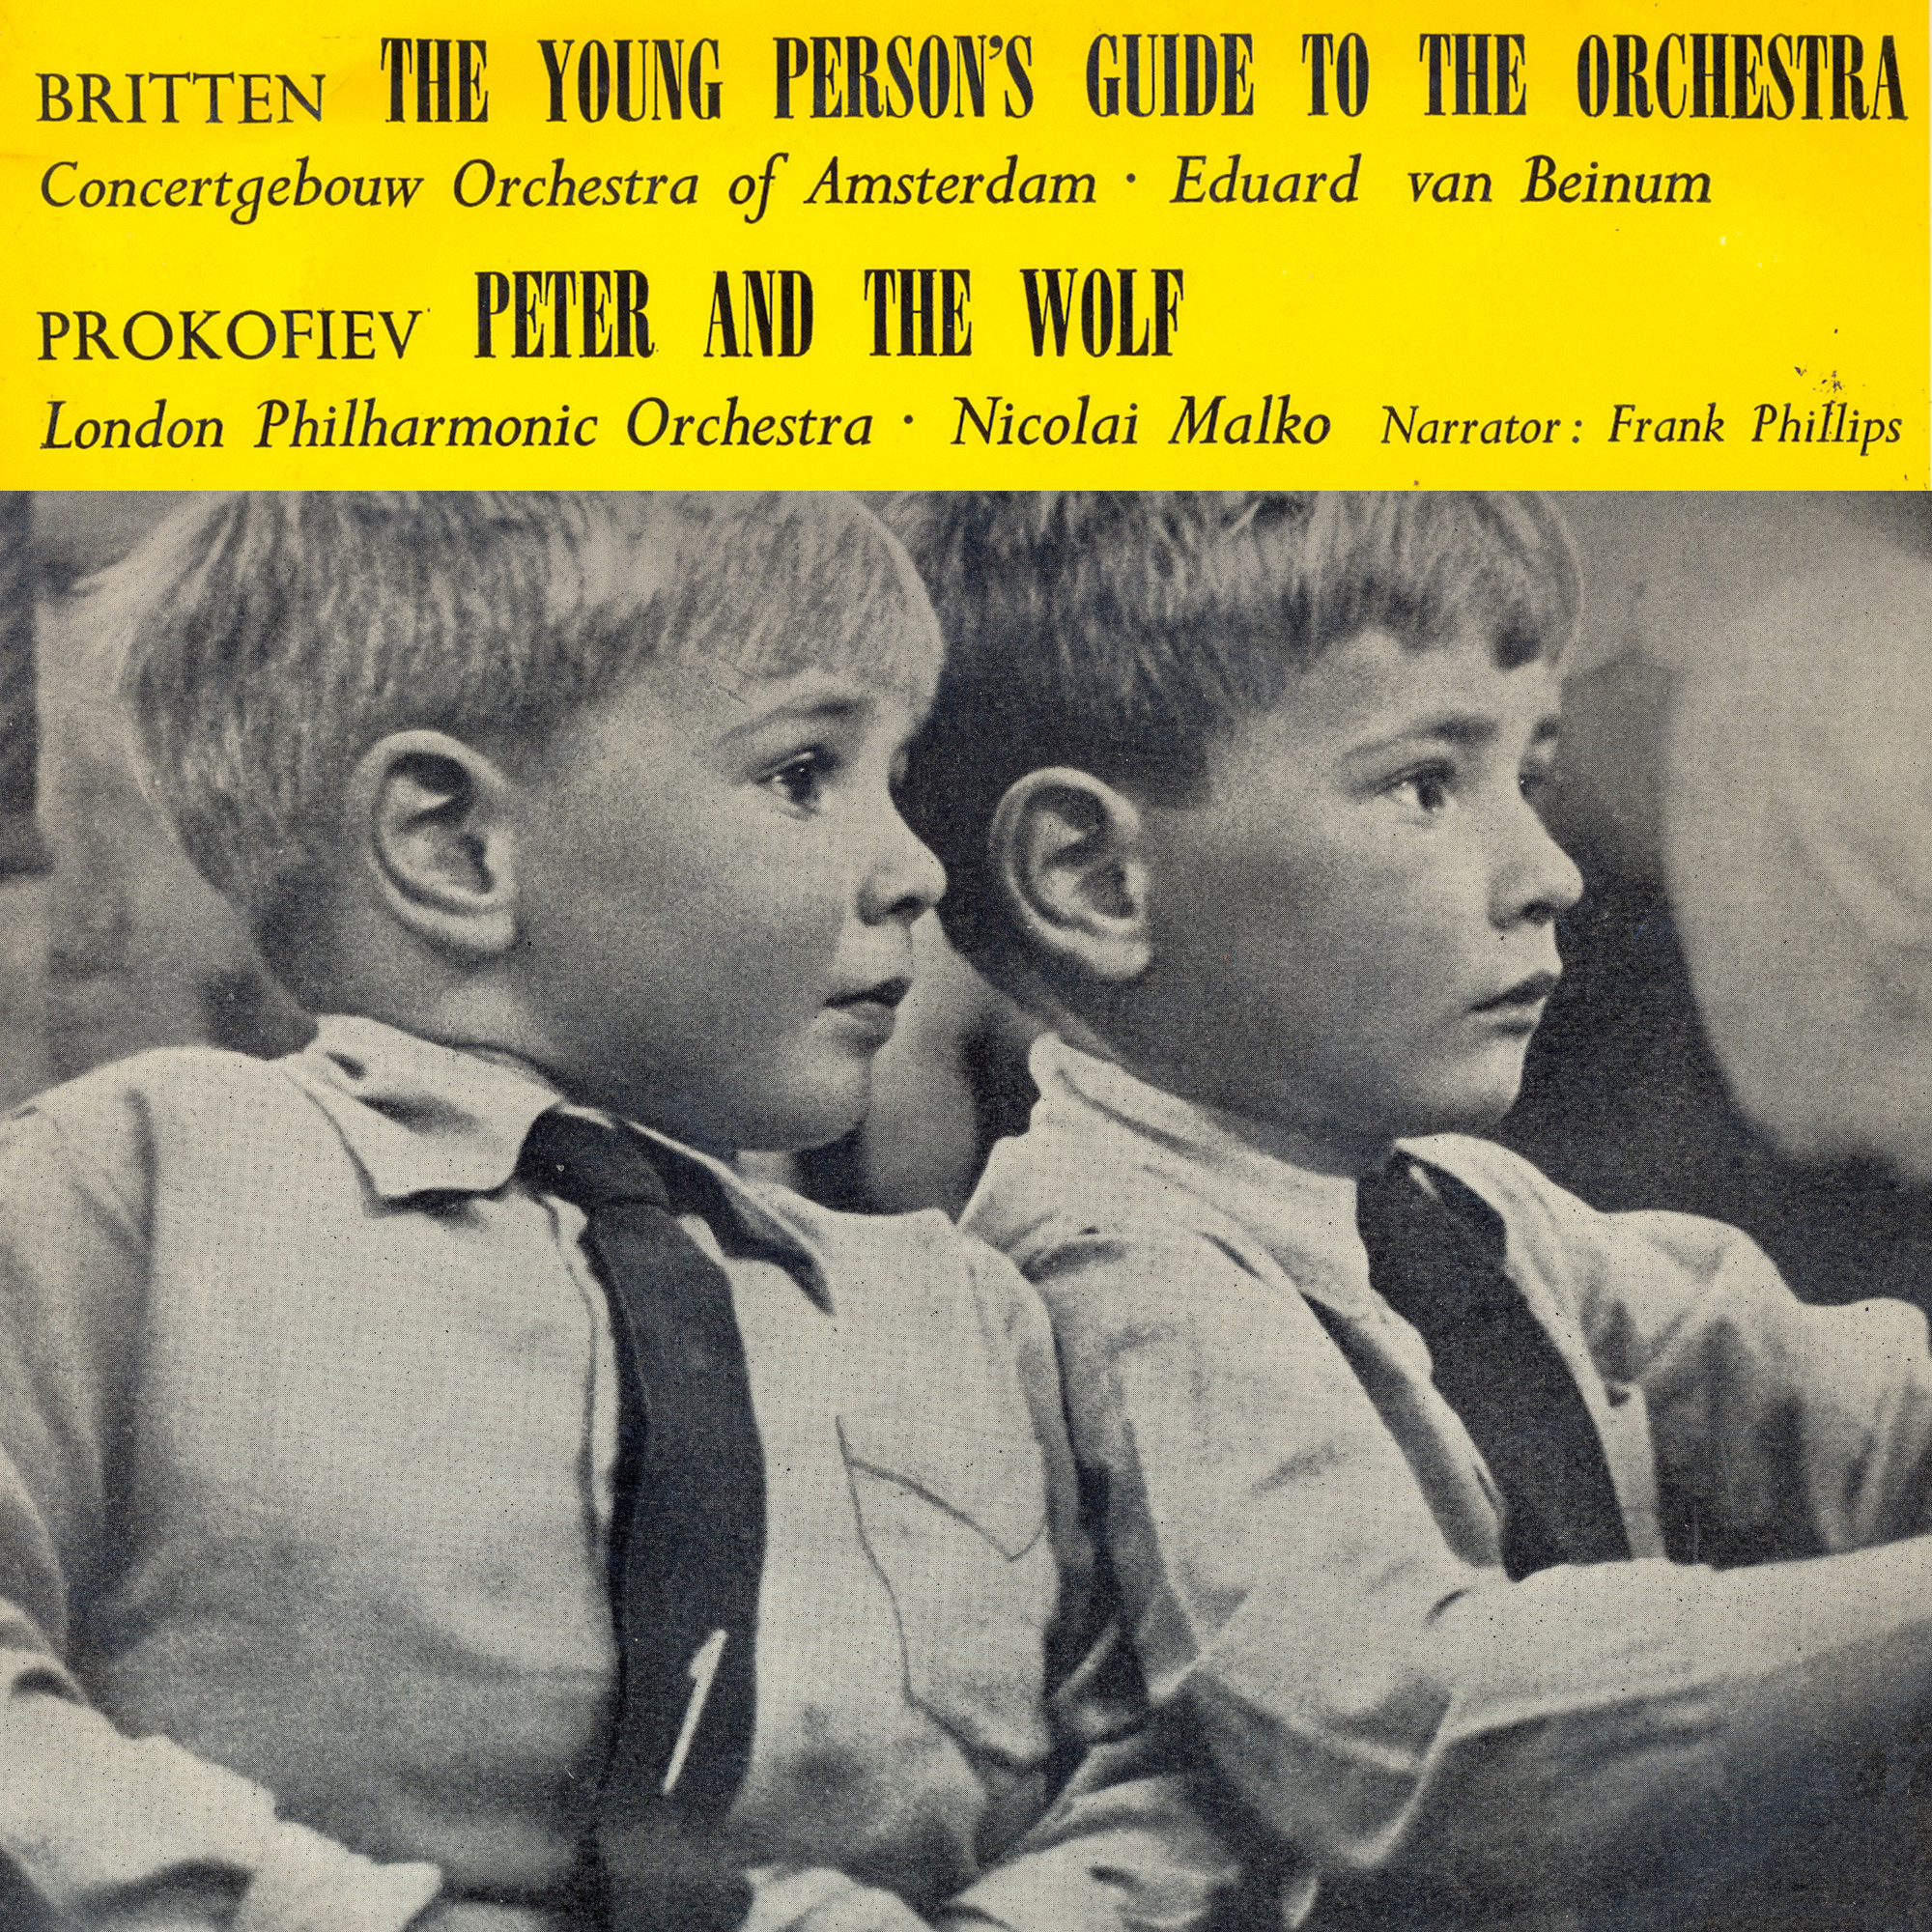 Britten's Young Person's Guide to the Orchestra and Prokofiev's Pete and the Wolf